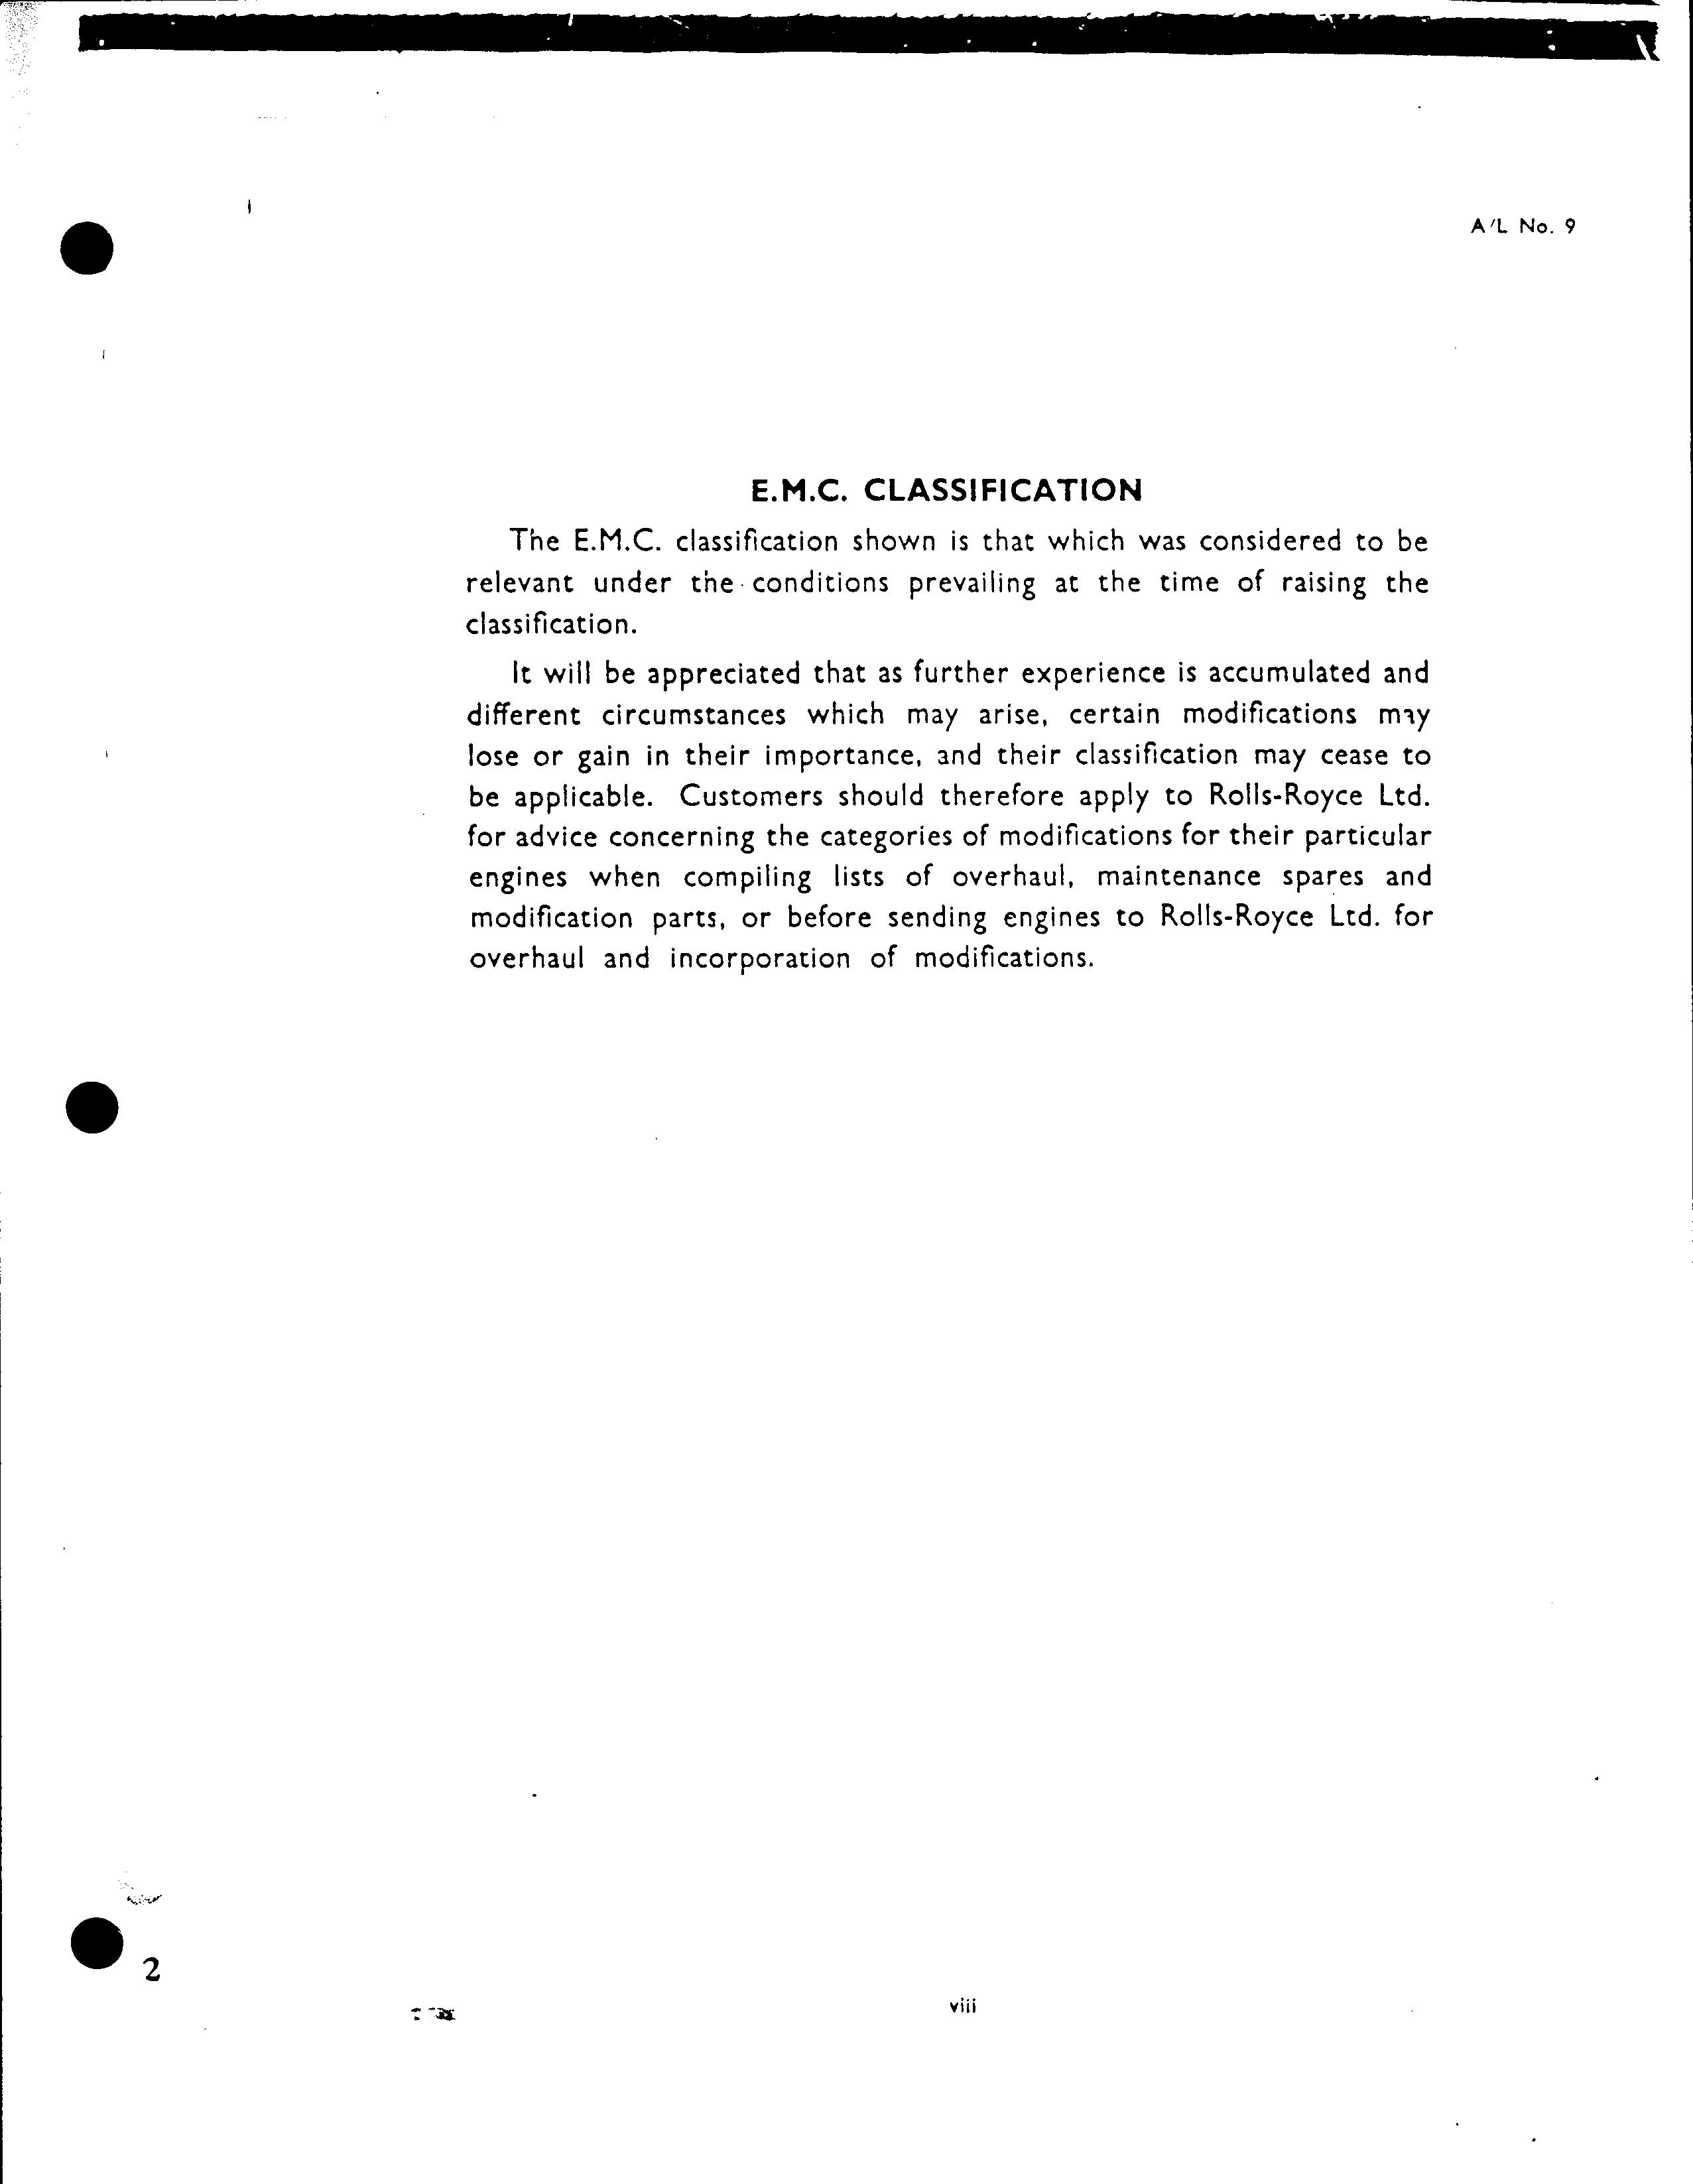 Sample page 10 from AirCorps Library document: Numerical List of Modifications to Rolls Royce Merlin Engines